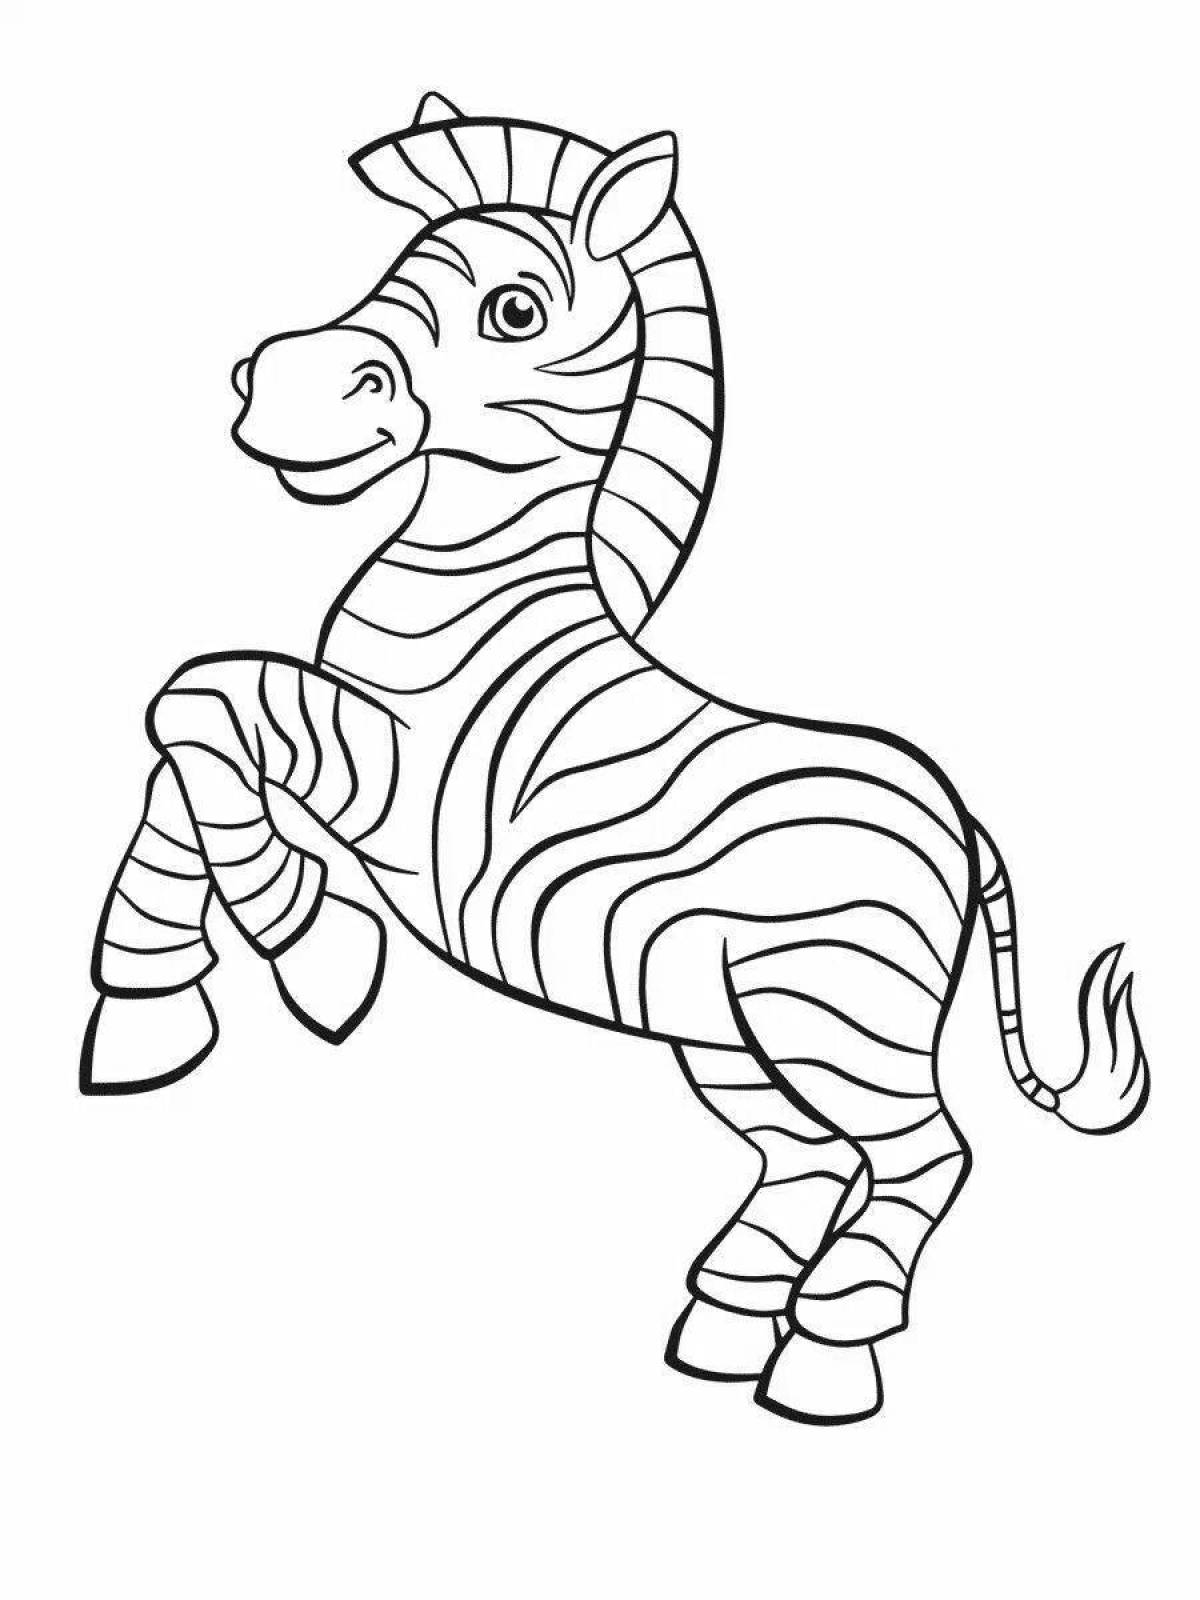 Outstanding junior zebra coloring page